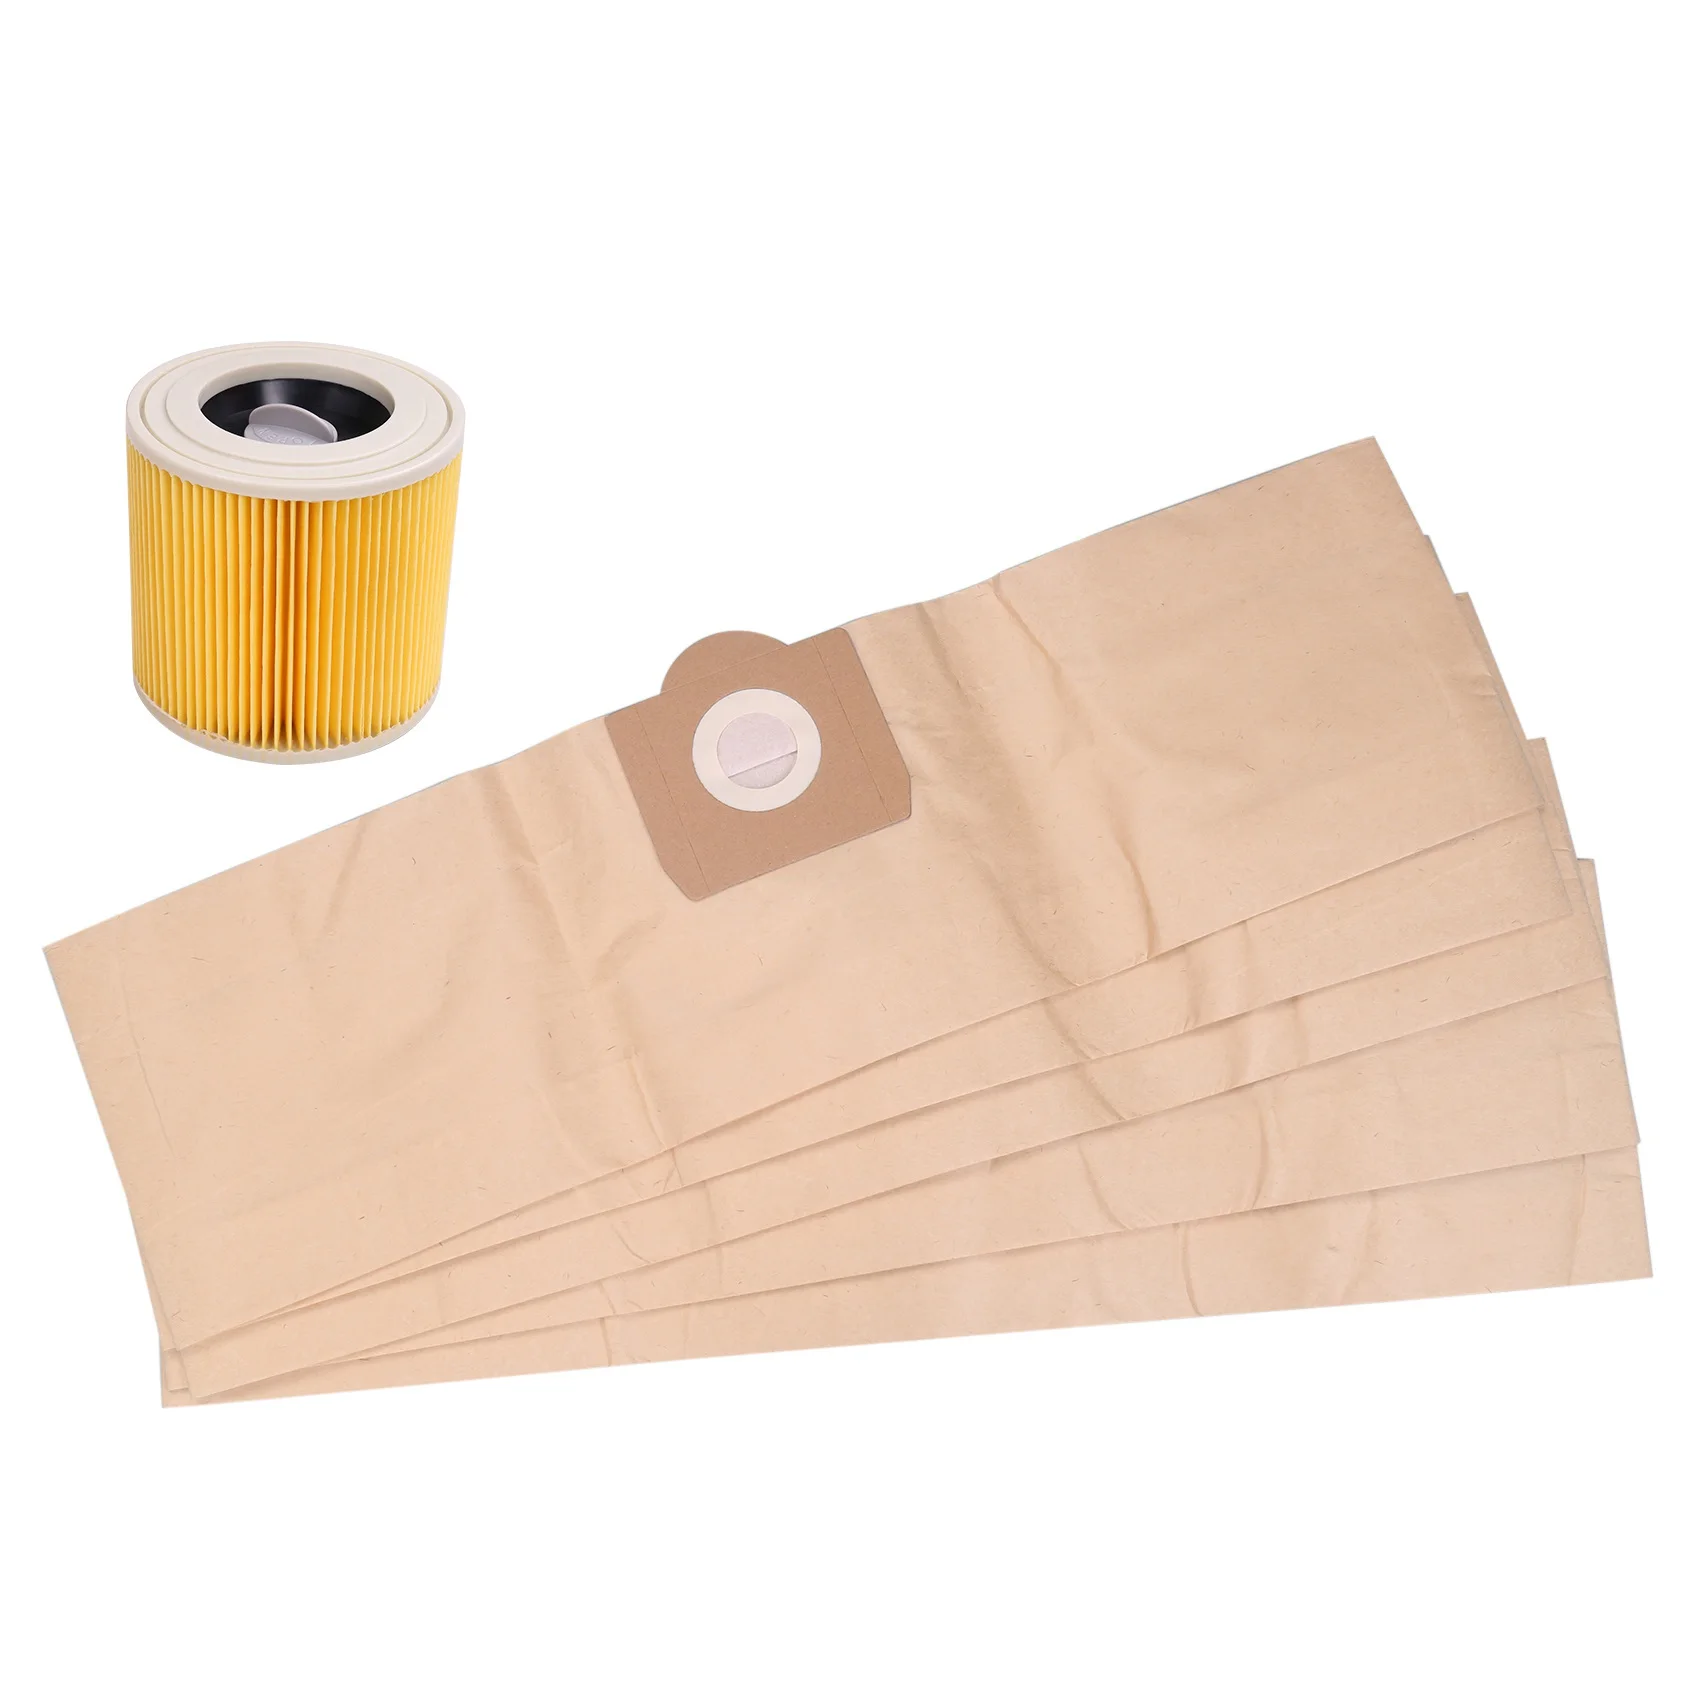 

5X Dust Bag 1X Filter for KARCHER WD3 Premium WD 3,300 M WD 3,200 WD3.500 P 6,959-130 Vacuum Cleaner